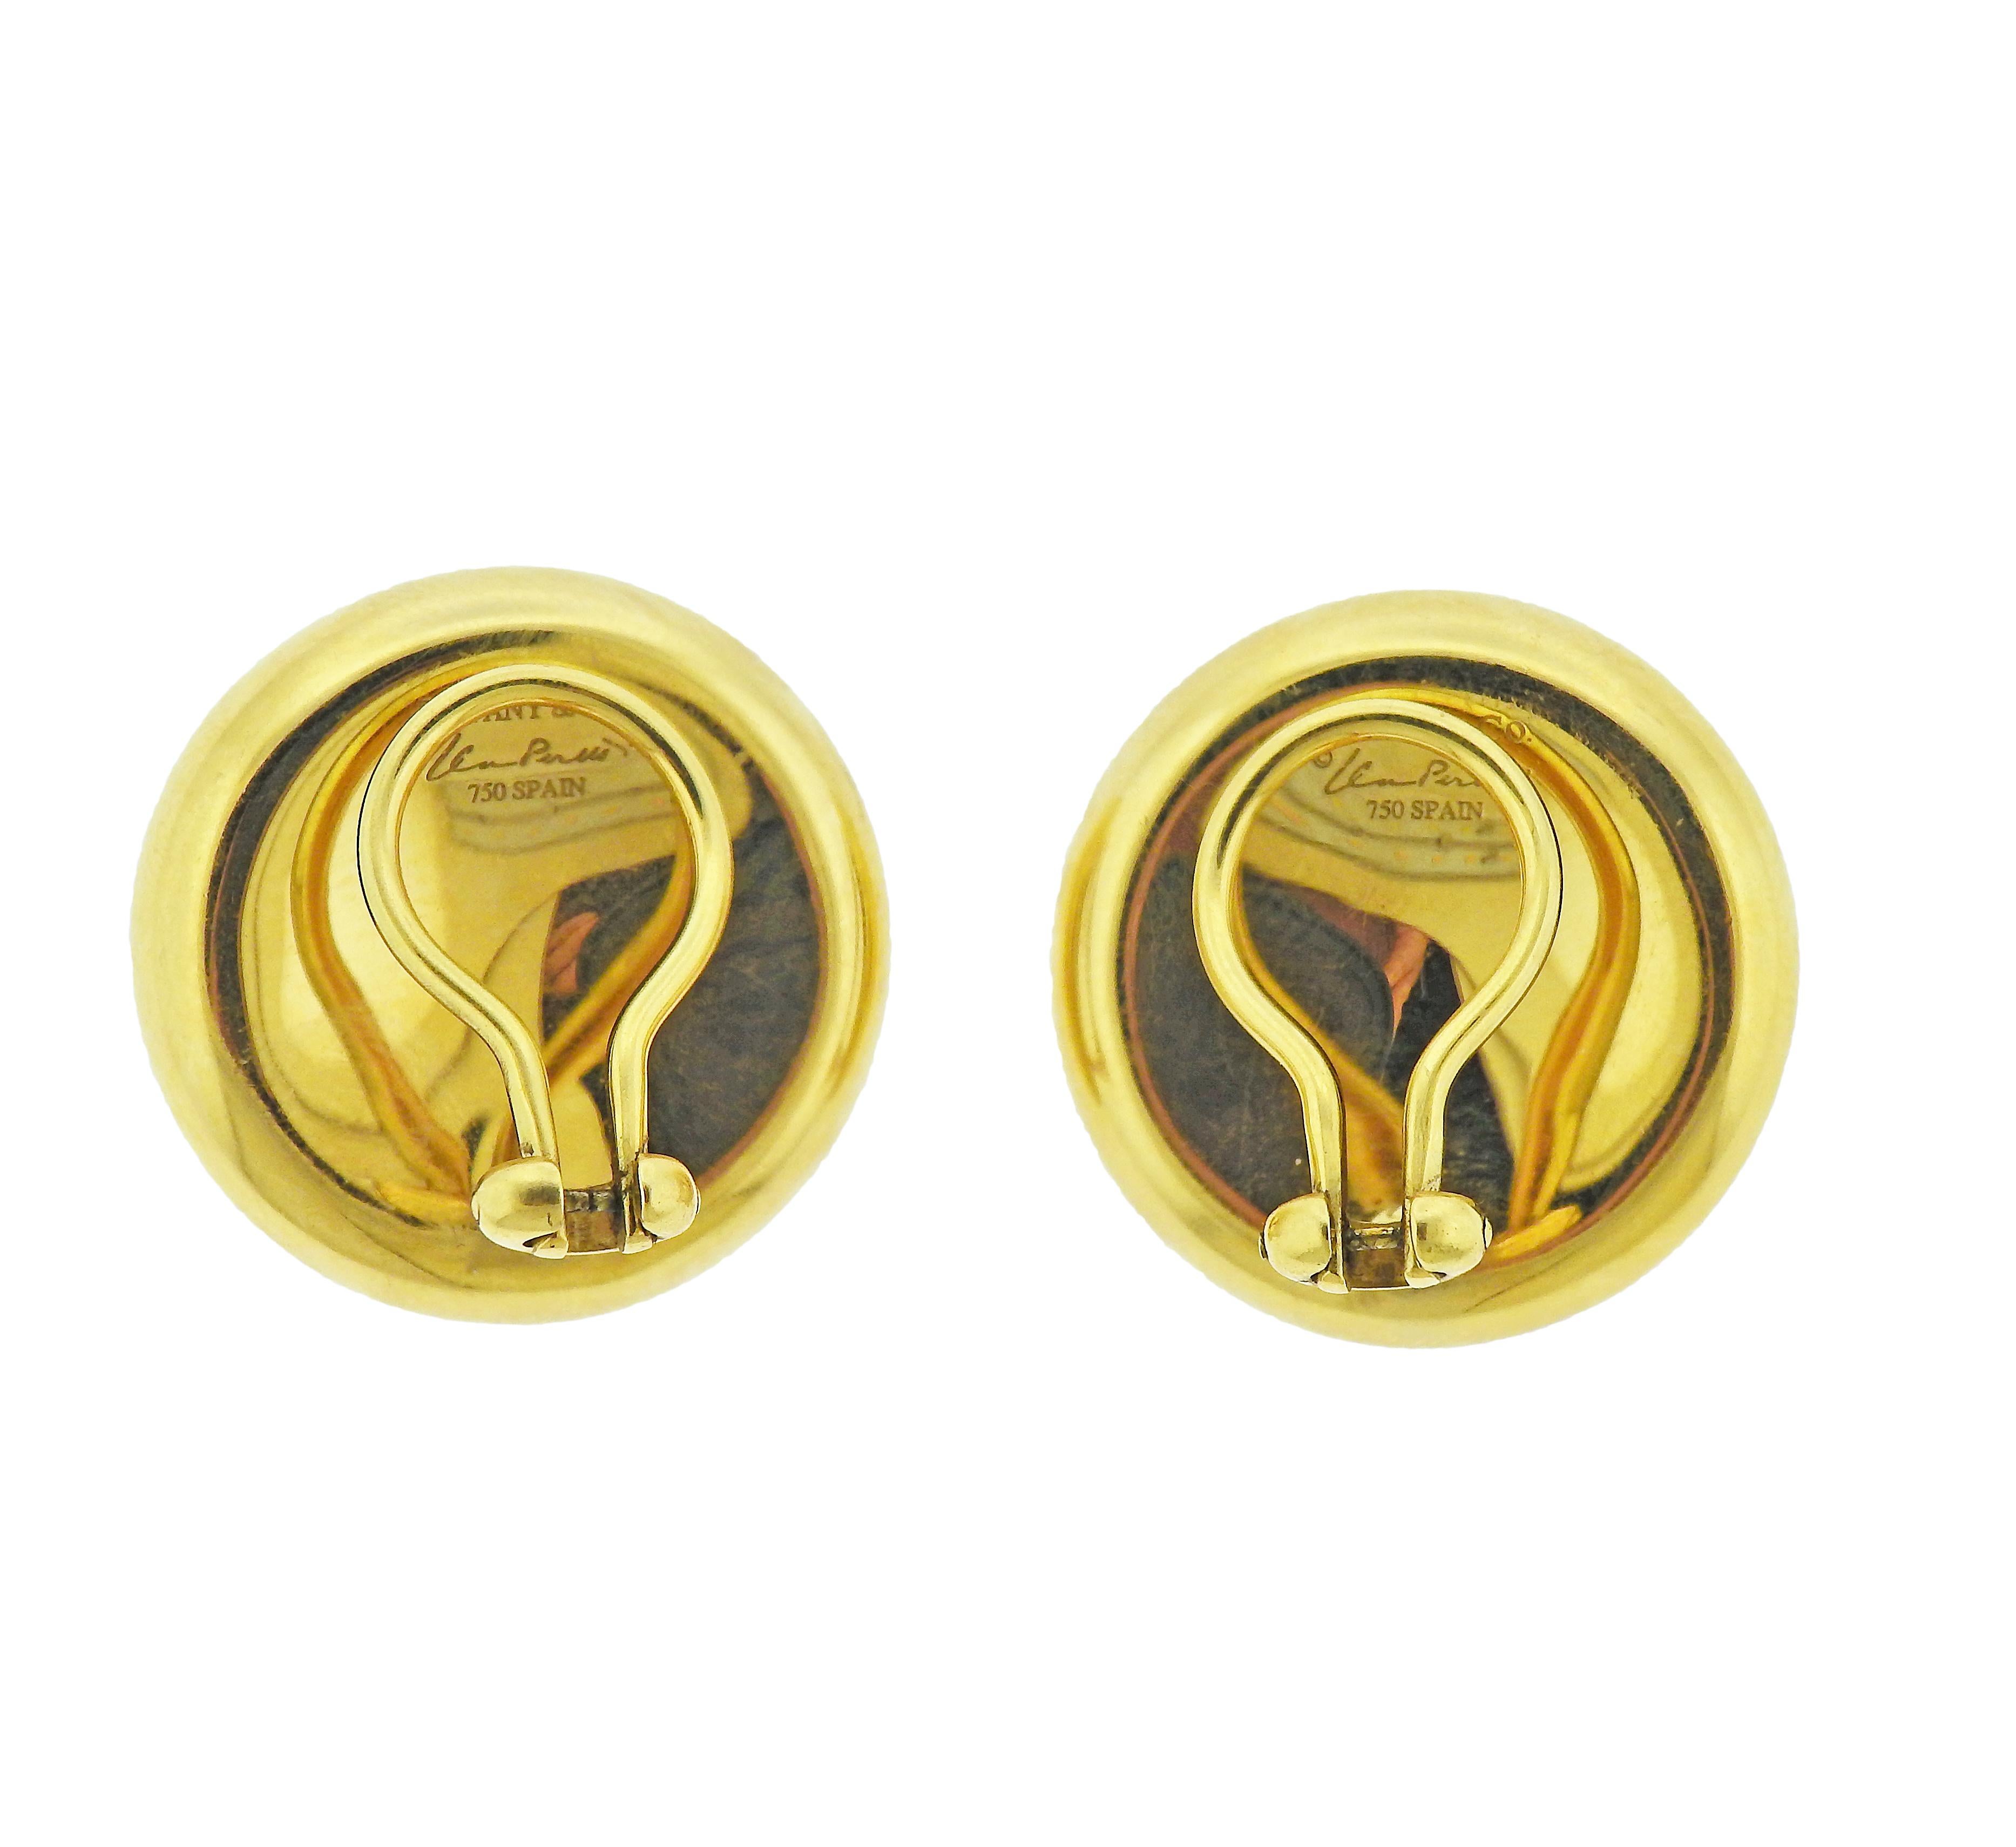 Pair of 18k gold indented design earrings, by Elsa Peretti for Tiffany & Co. Earrings are 23mm in diameter. Marked: Tiffany & Co, Elsa Peretti, Spain, 750. Weight - 17 grams.